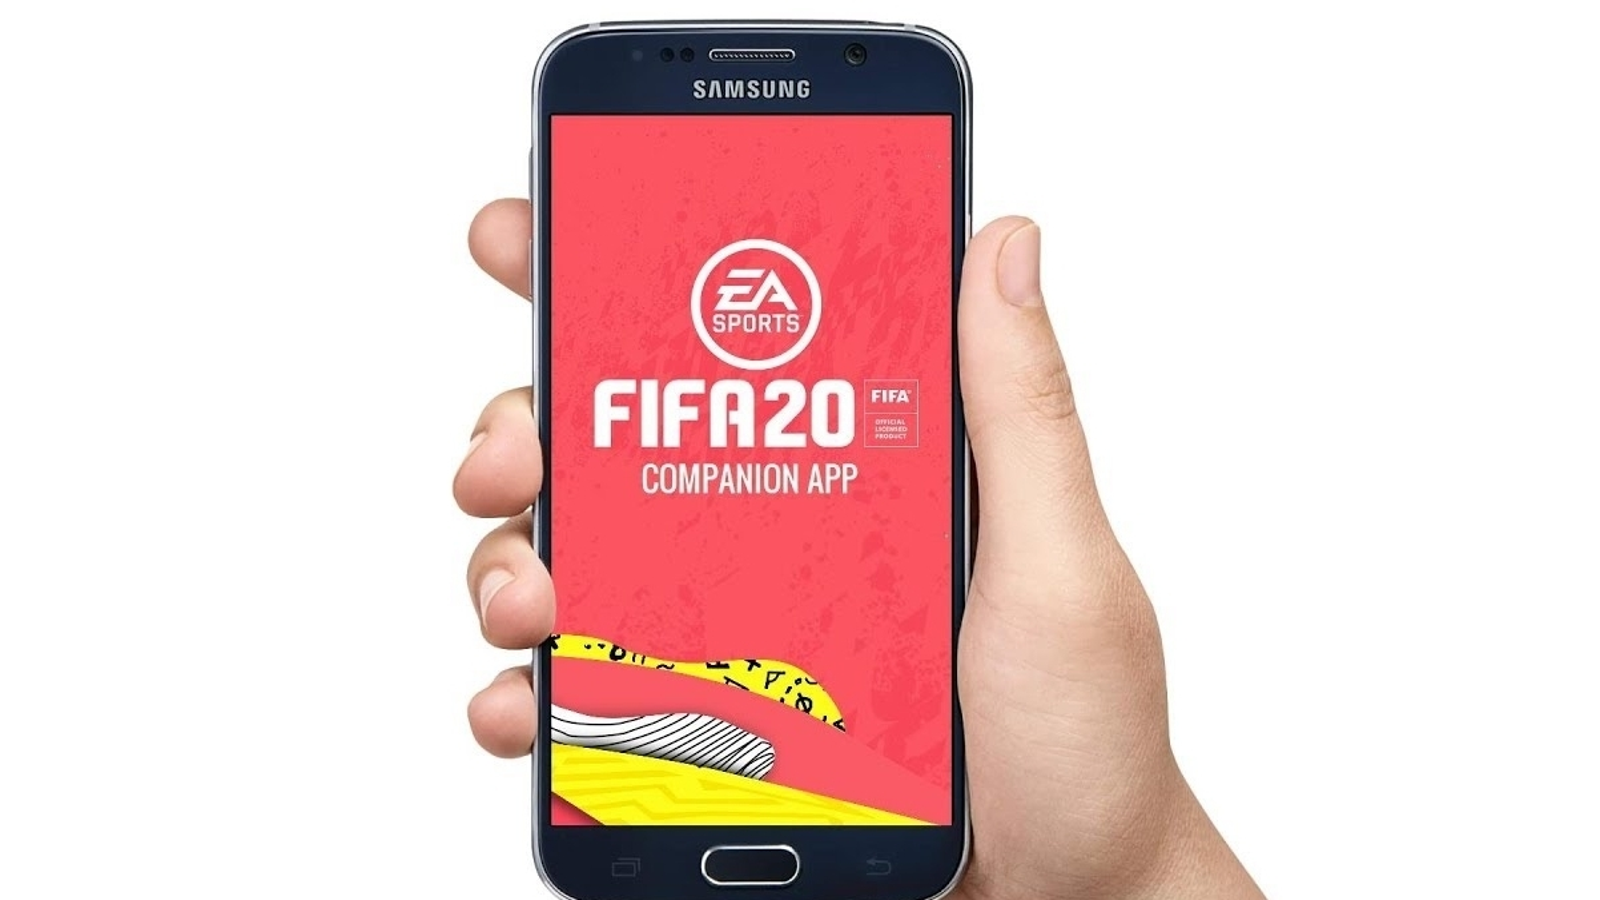 FIFA 20 Companion App Available Now For iOS and Android Devices